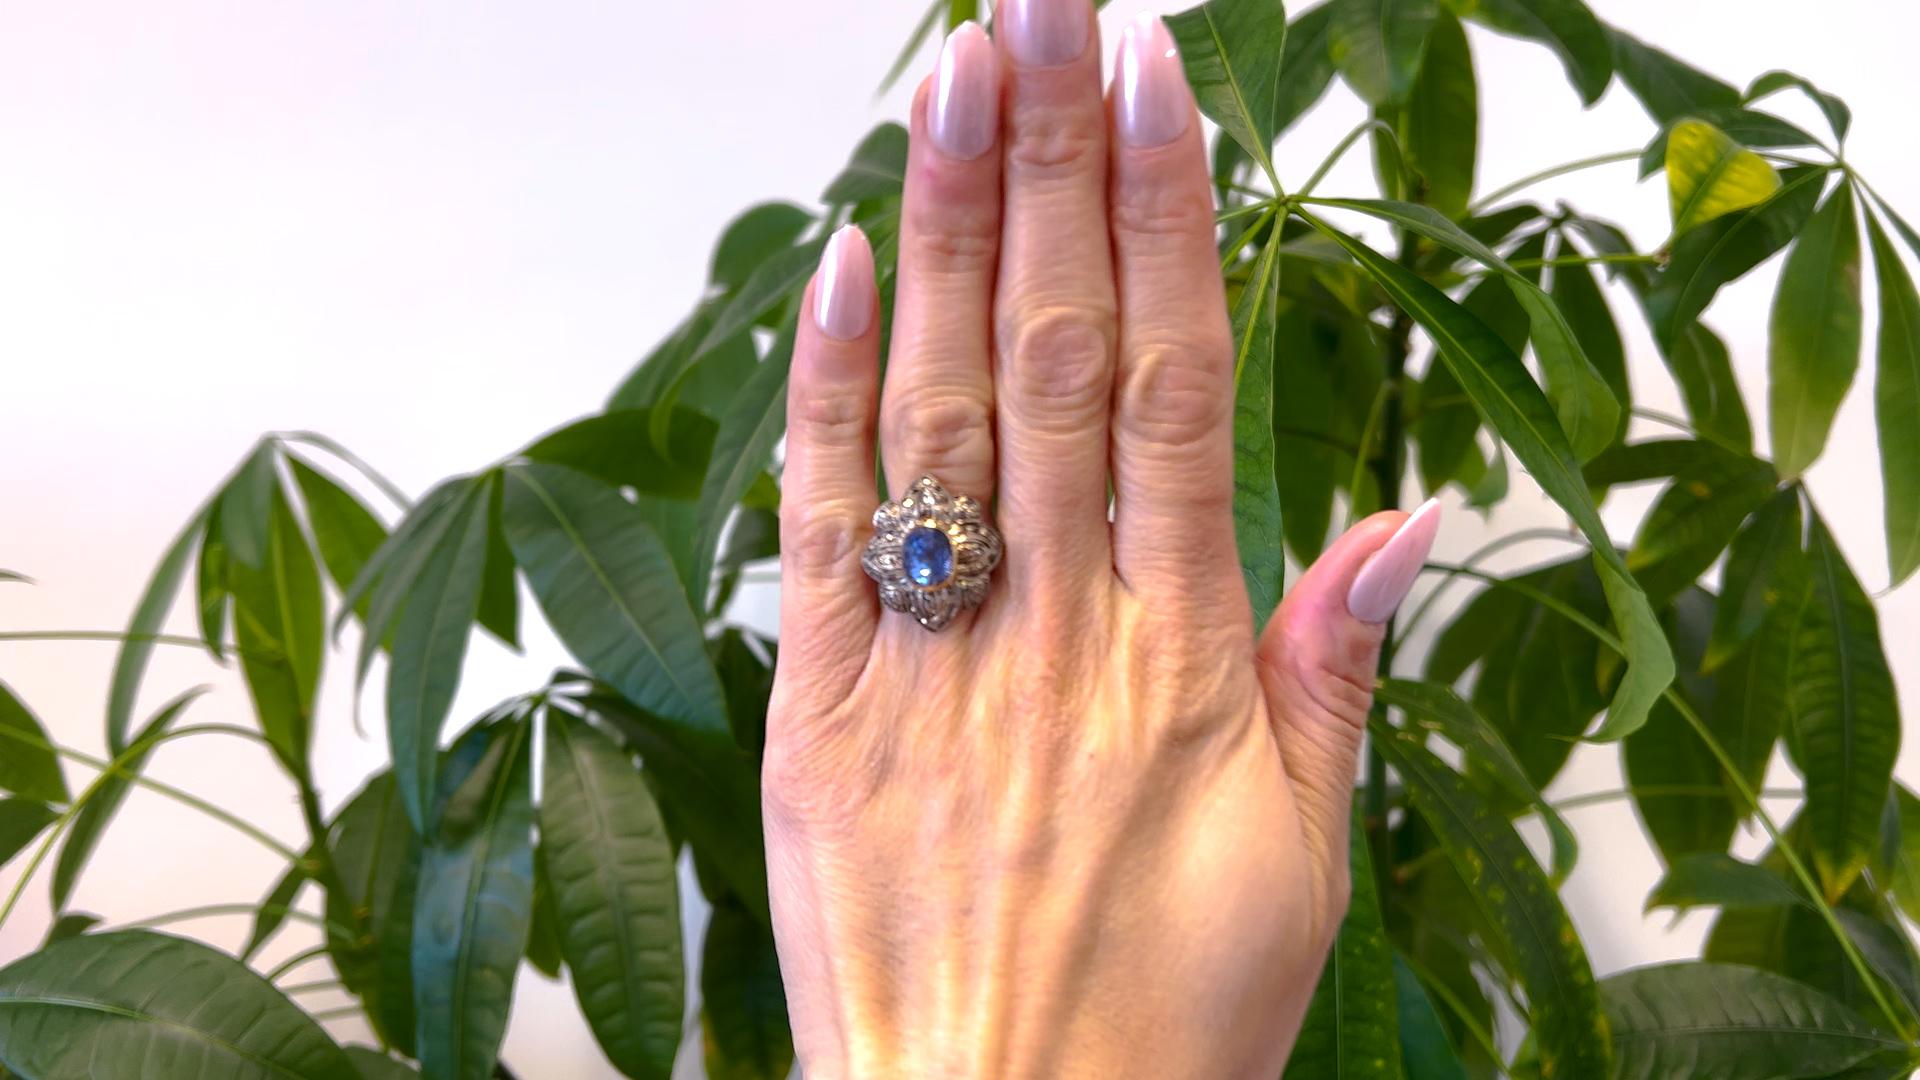 One Antique Portuguese Sapphire and Diamond Gold Silver Ring. Featuring one oval mixed cut sapphire weighing approximately 3.35 carats. Accompanied by 50 rose cut diamonds with a total weight of approximately 0.25 carat, graded faint to very light,